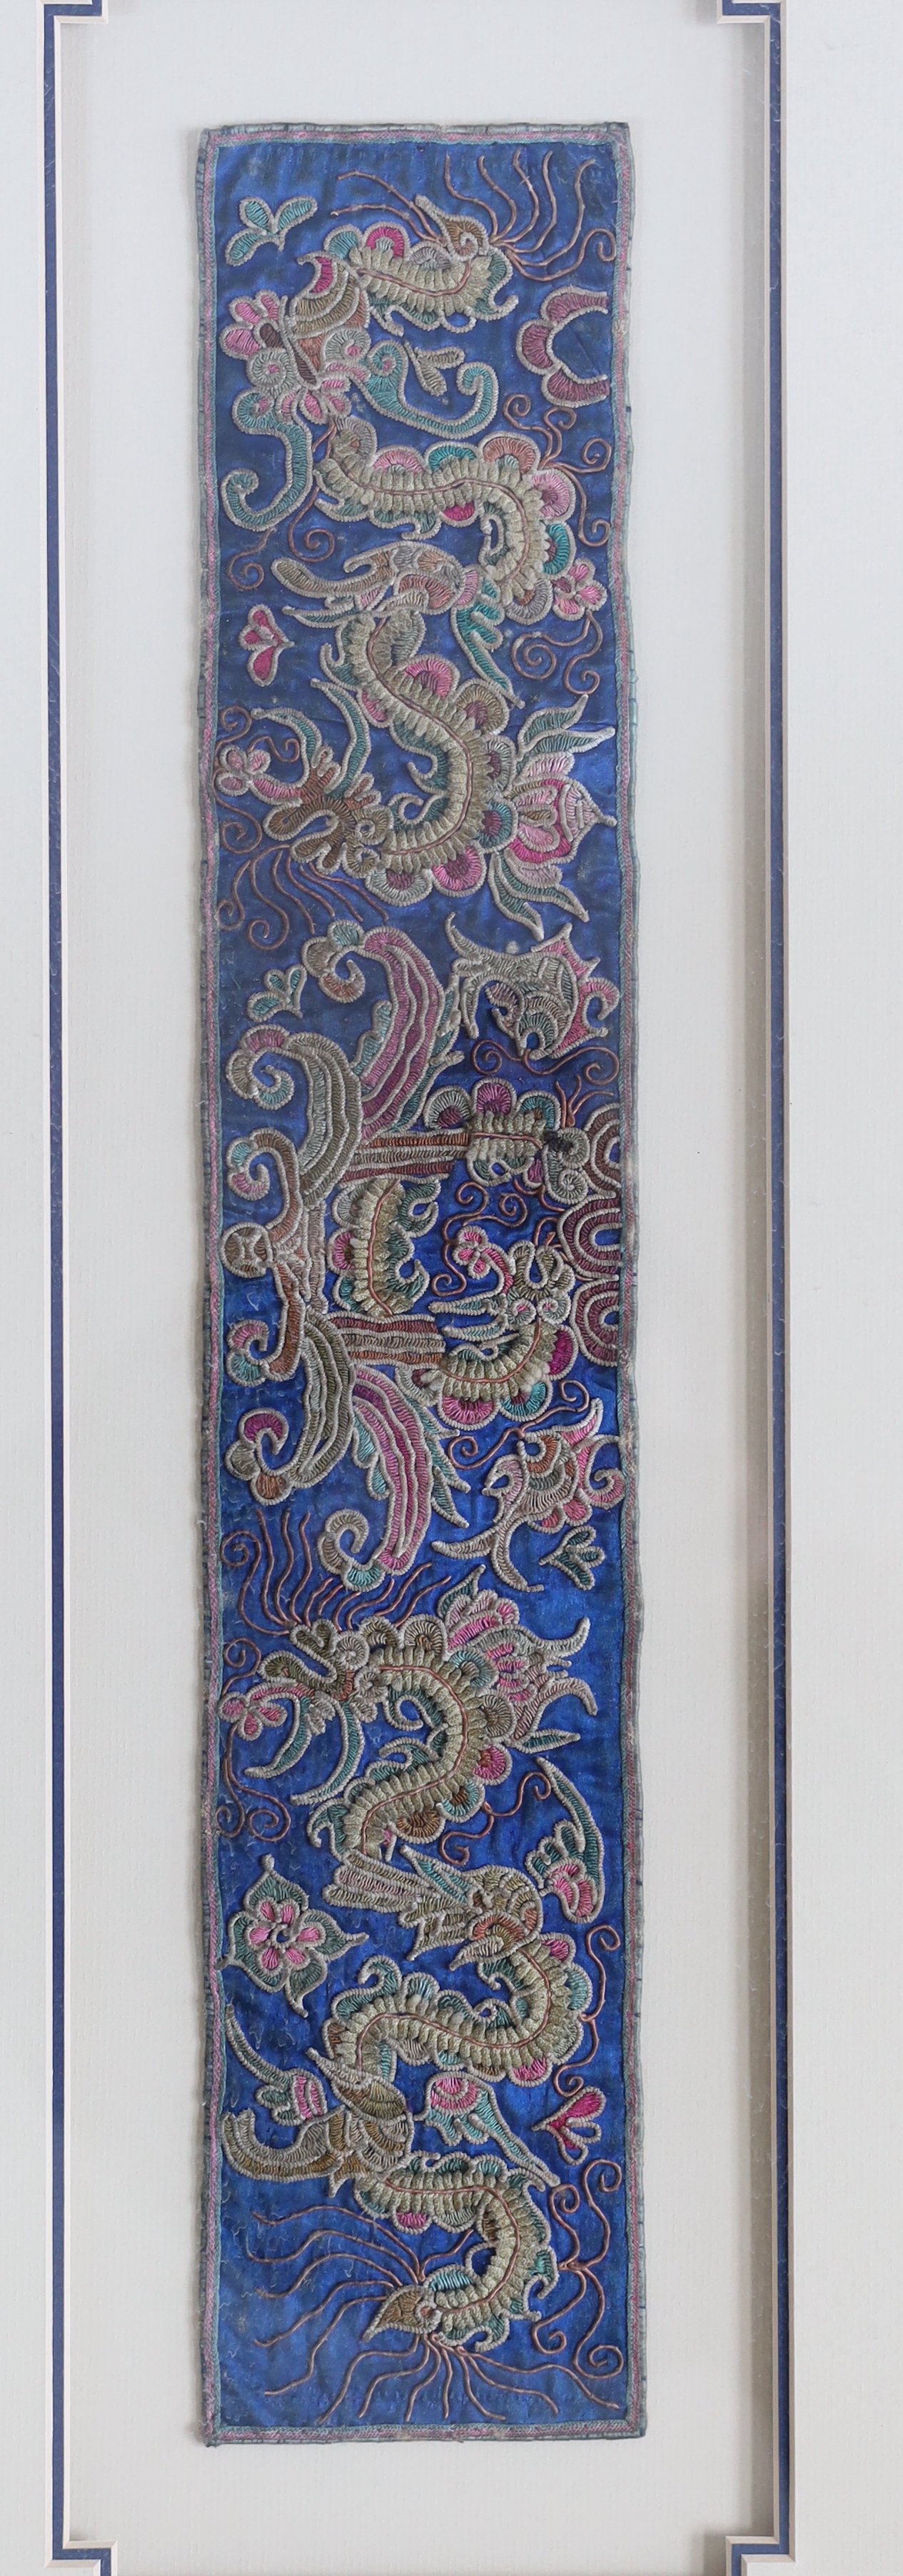 Two 19th century Chinese sleeve bands, embroidered in rich polychromes silks, designed with - Image 2 of 3